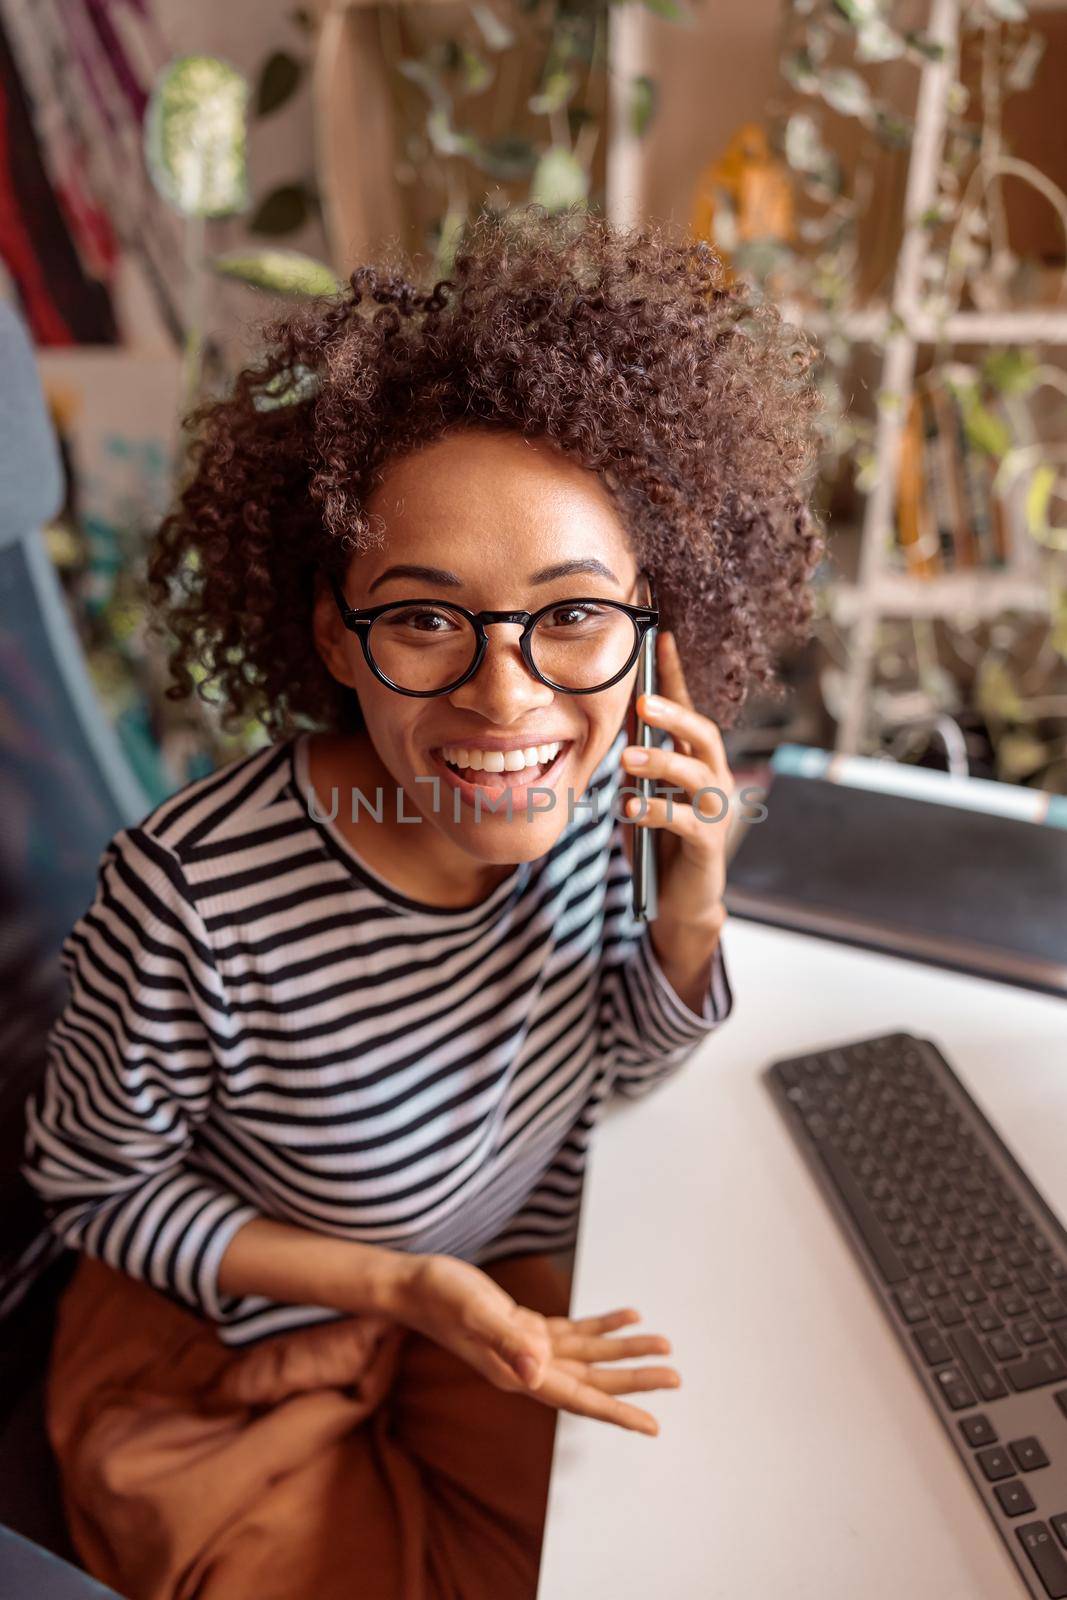 Cheerful multiethnic lady having phone conversation and smiling while sitting at the table with keyboard